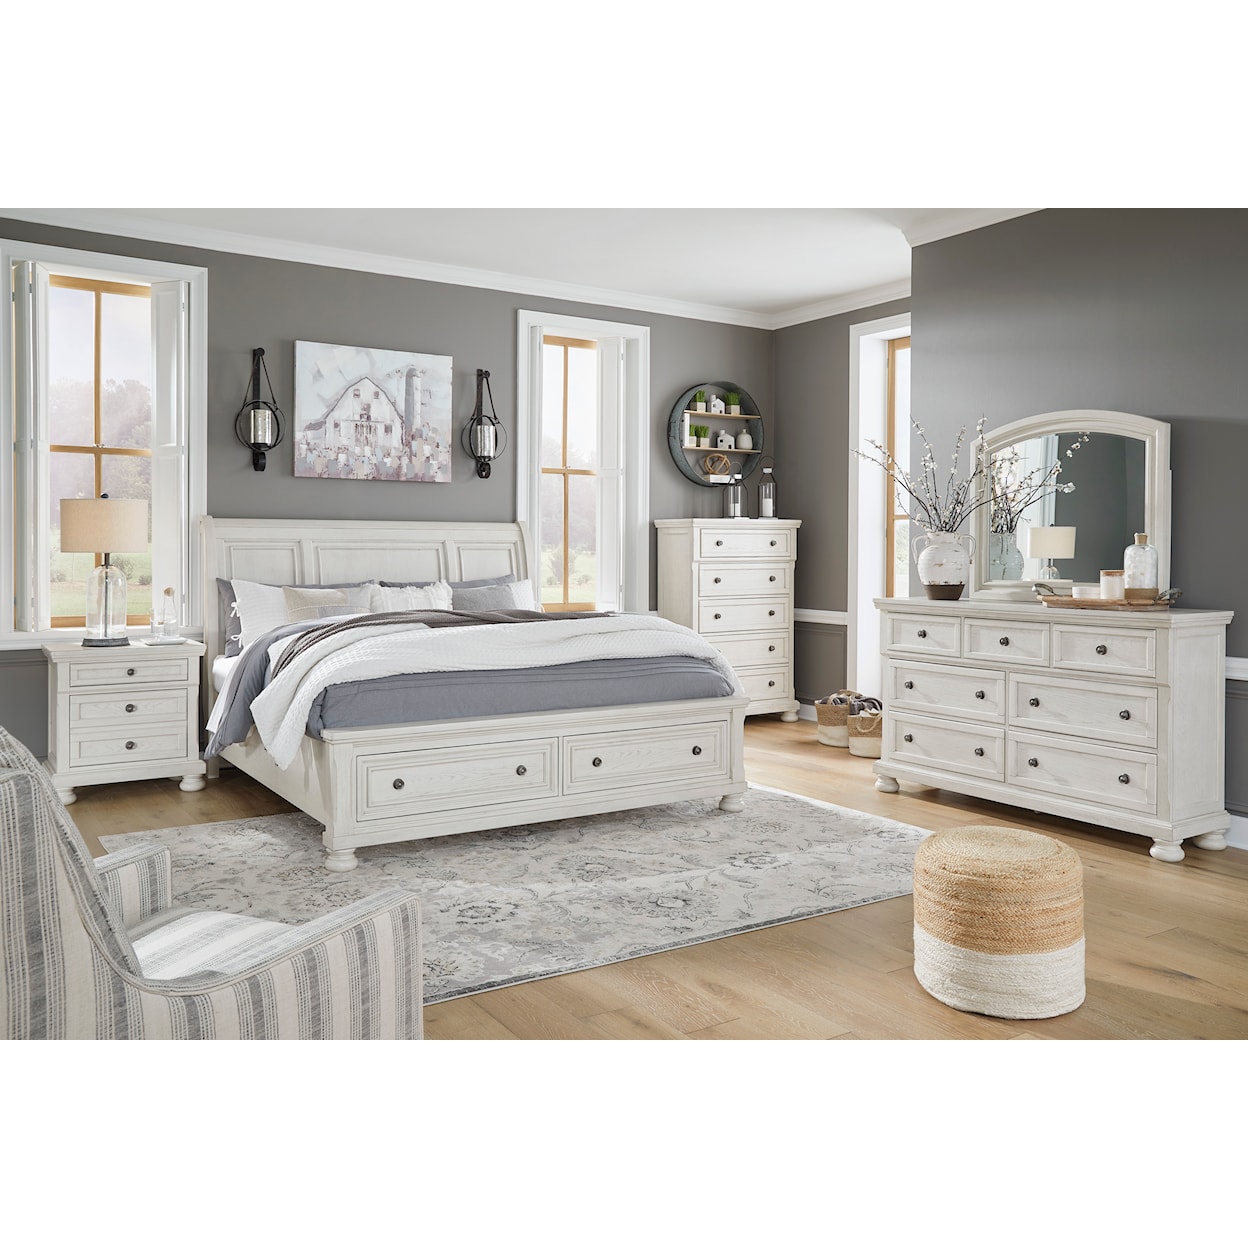 Signature Design by Ashley Furniture Robbinsdale King Bedroom Group